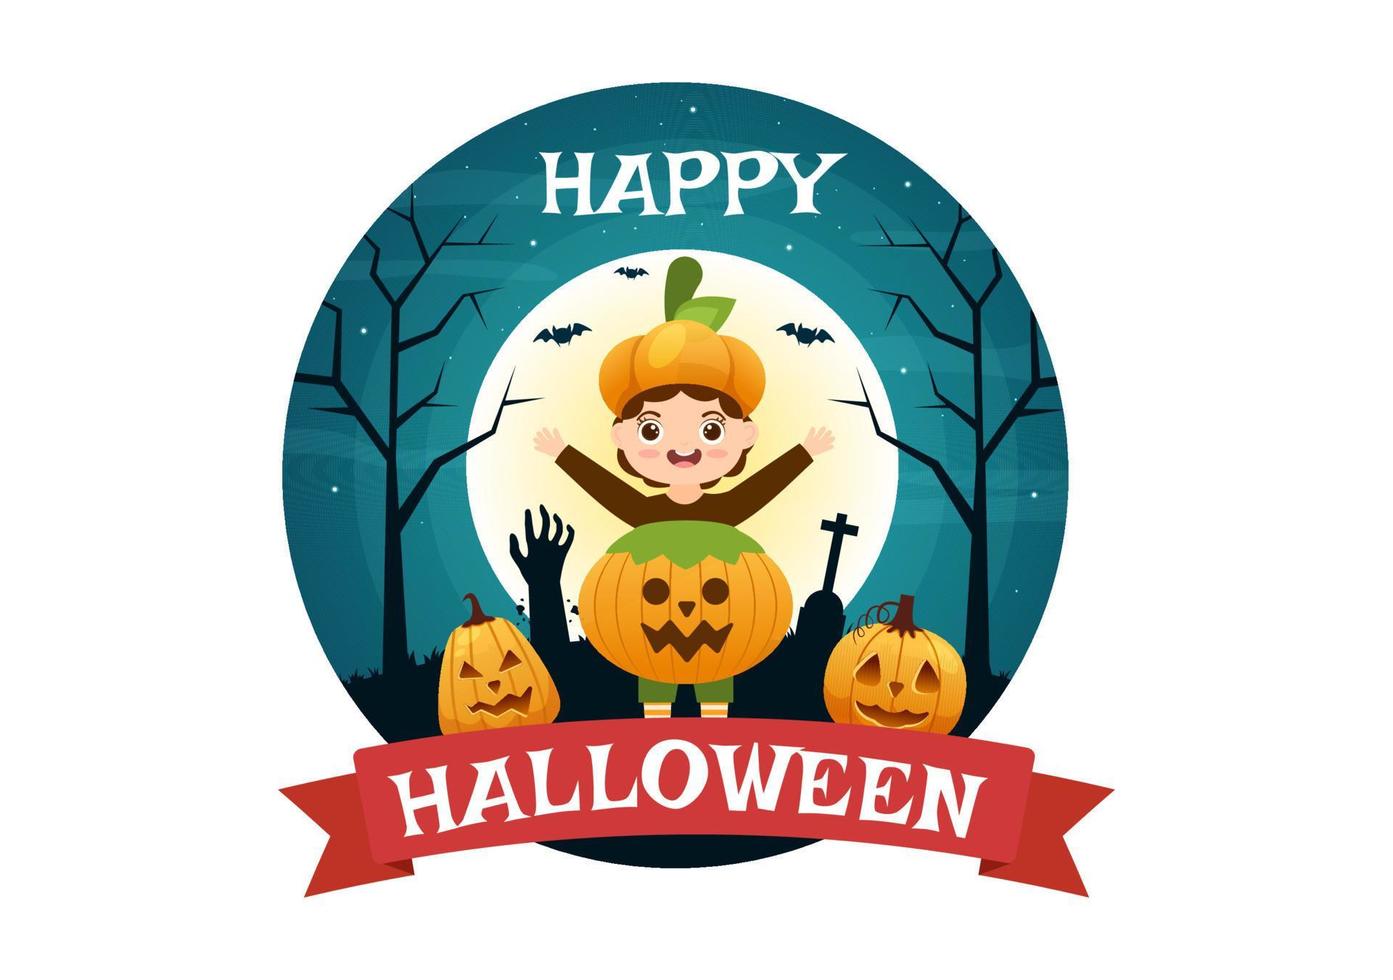 Happy Halloween Template Background Hand Drawn Cartoon Flat Illustration with Children Wearing Various Costumes, Haunted House, Pumpkins, Bats and Full Moon vector